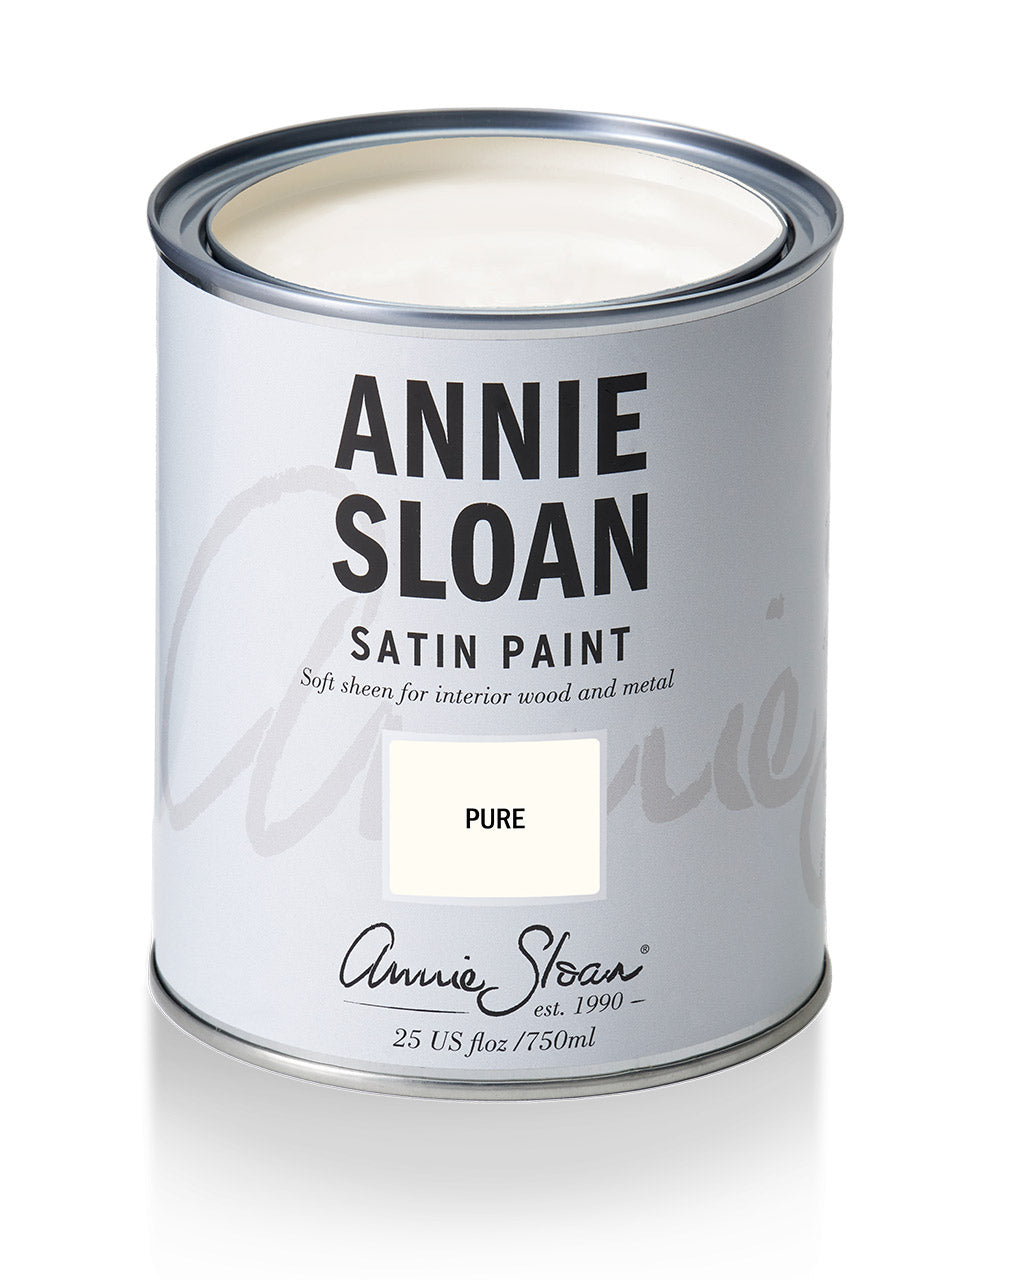 Pure Satin Paint by Annie Sloan